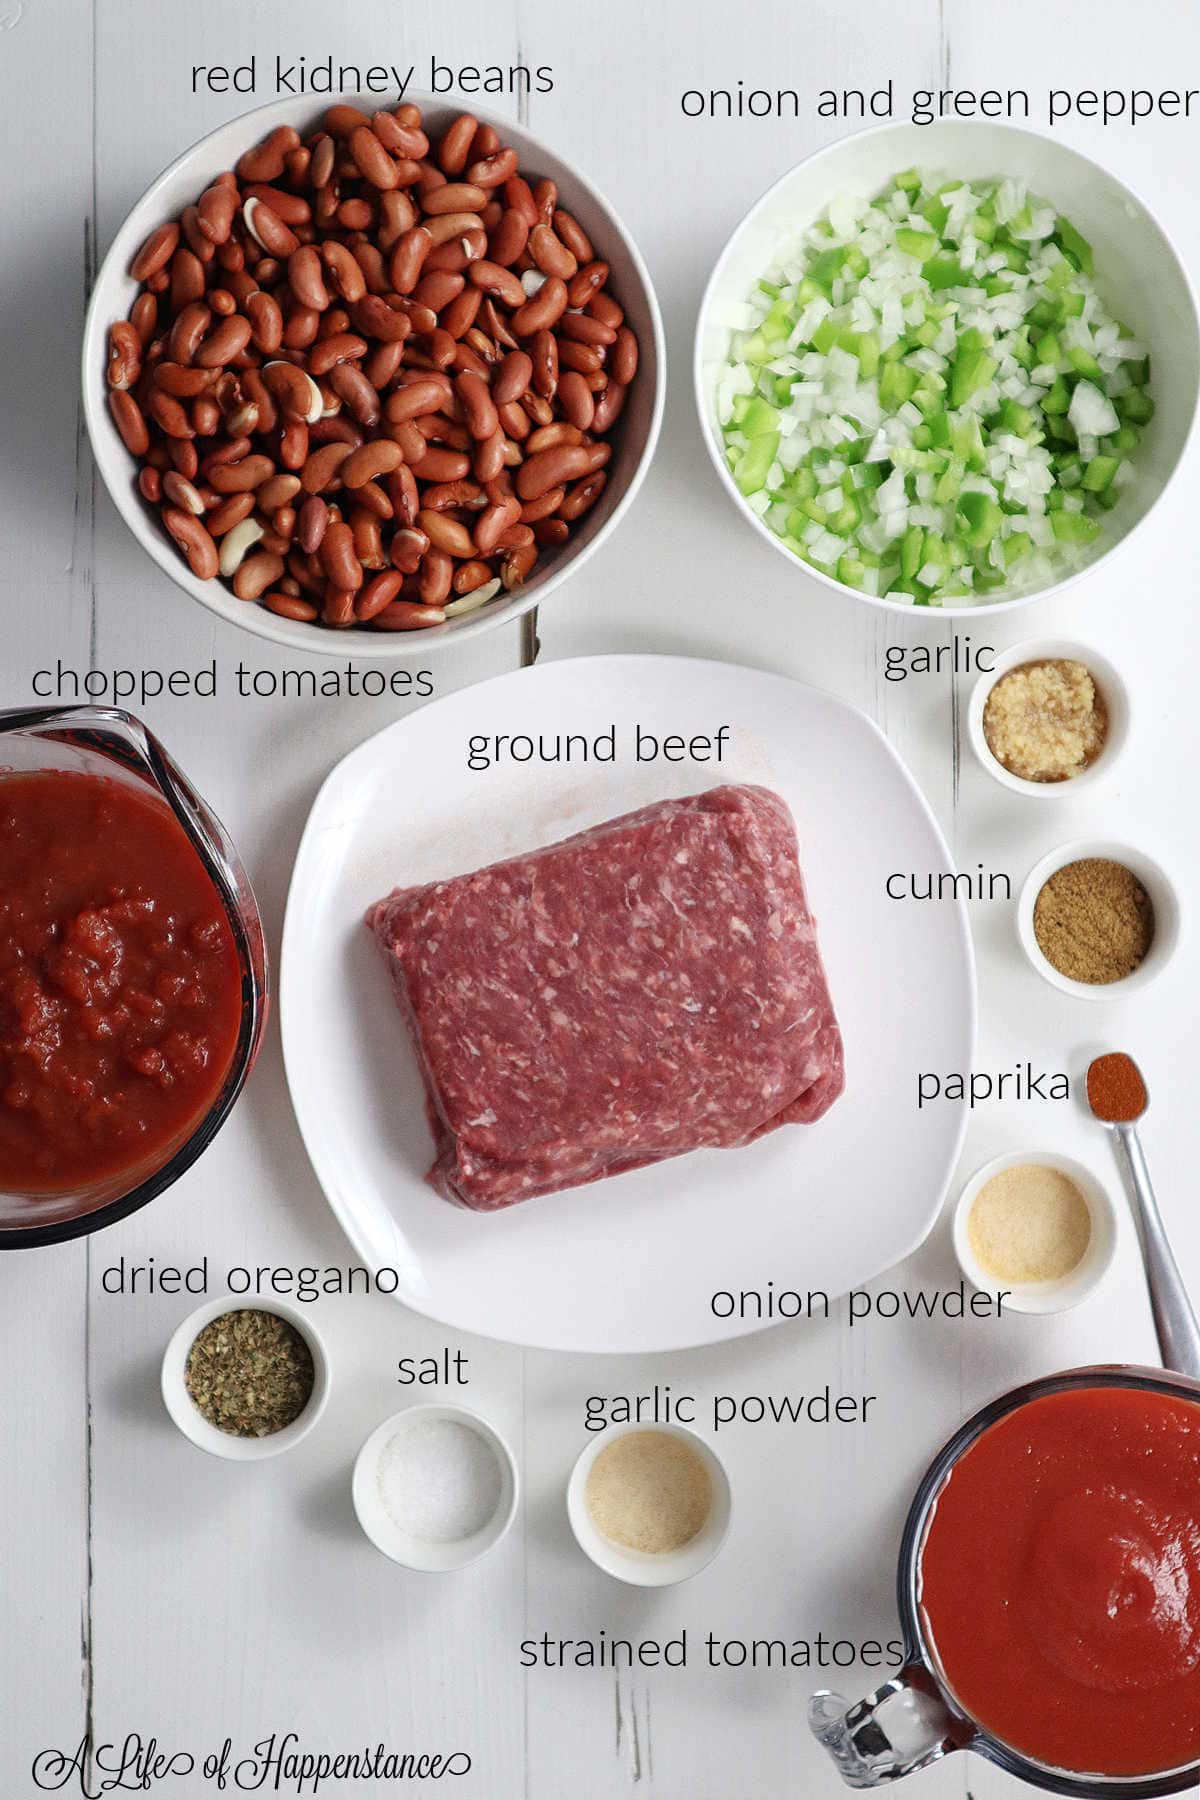 Ingredients for chili; red kidney beans, diced onions and grenn bell peppers, chopped tomatoes, ground beef, minced garlic, cumin, paprika, dried oregano, salt, garlic powder, onion powder, strained tomatoes.